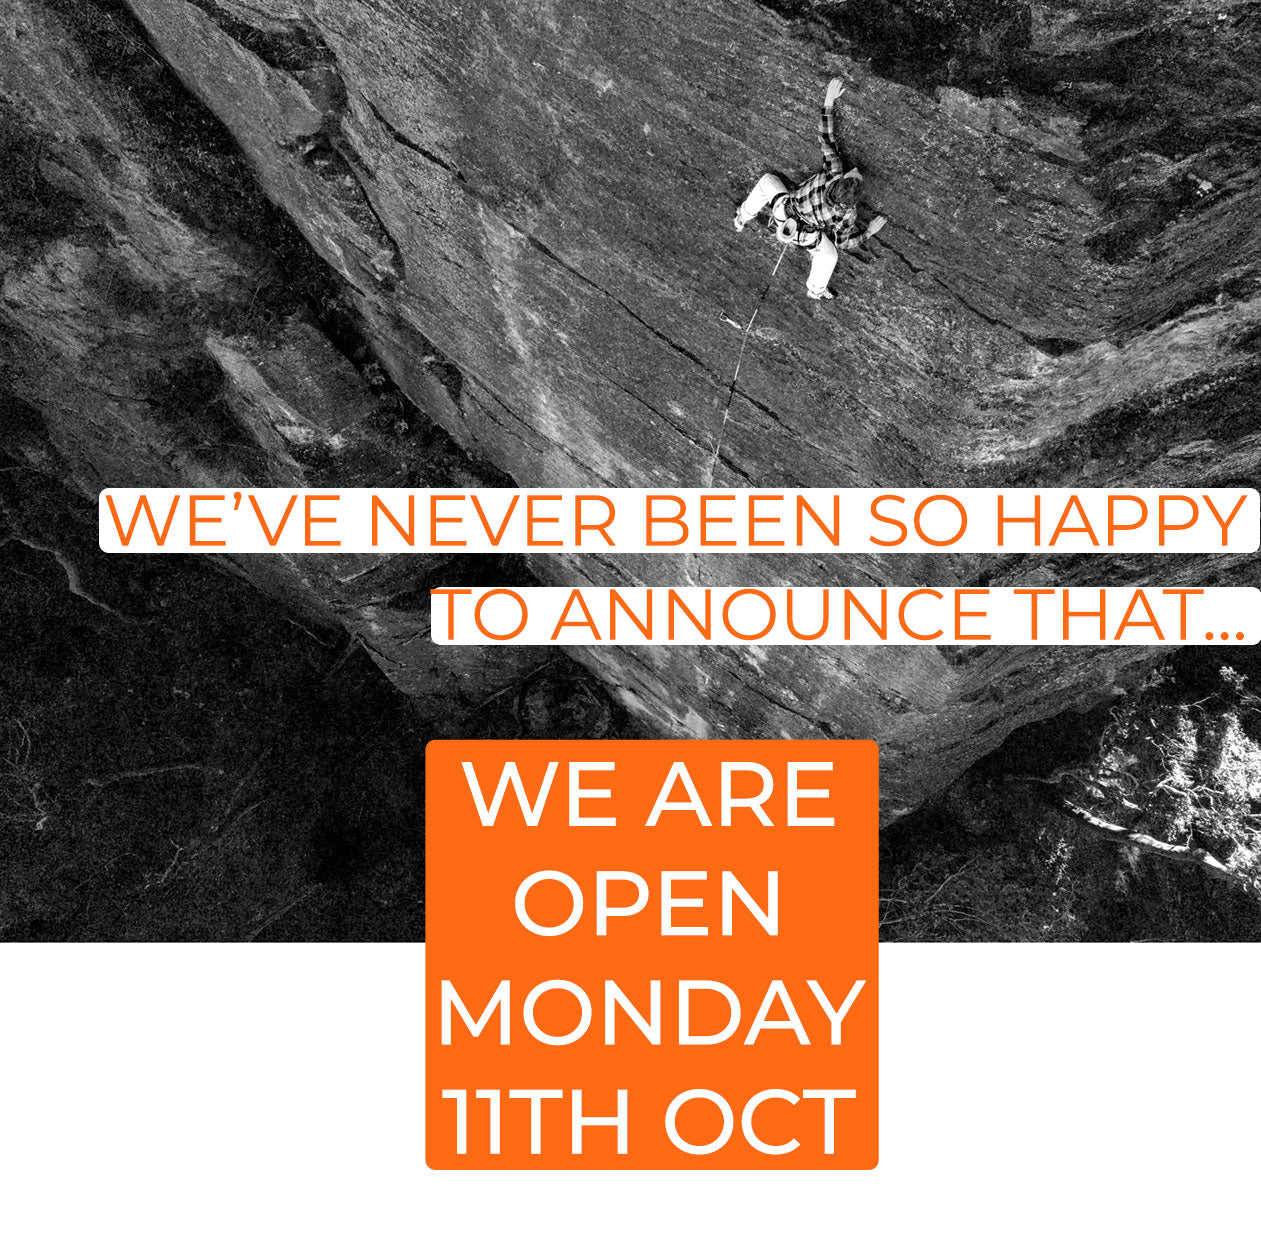 Mountain Equipment Sydney is opening Monday 11th October following new covid lockdowns